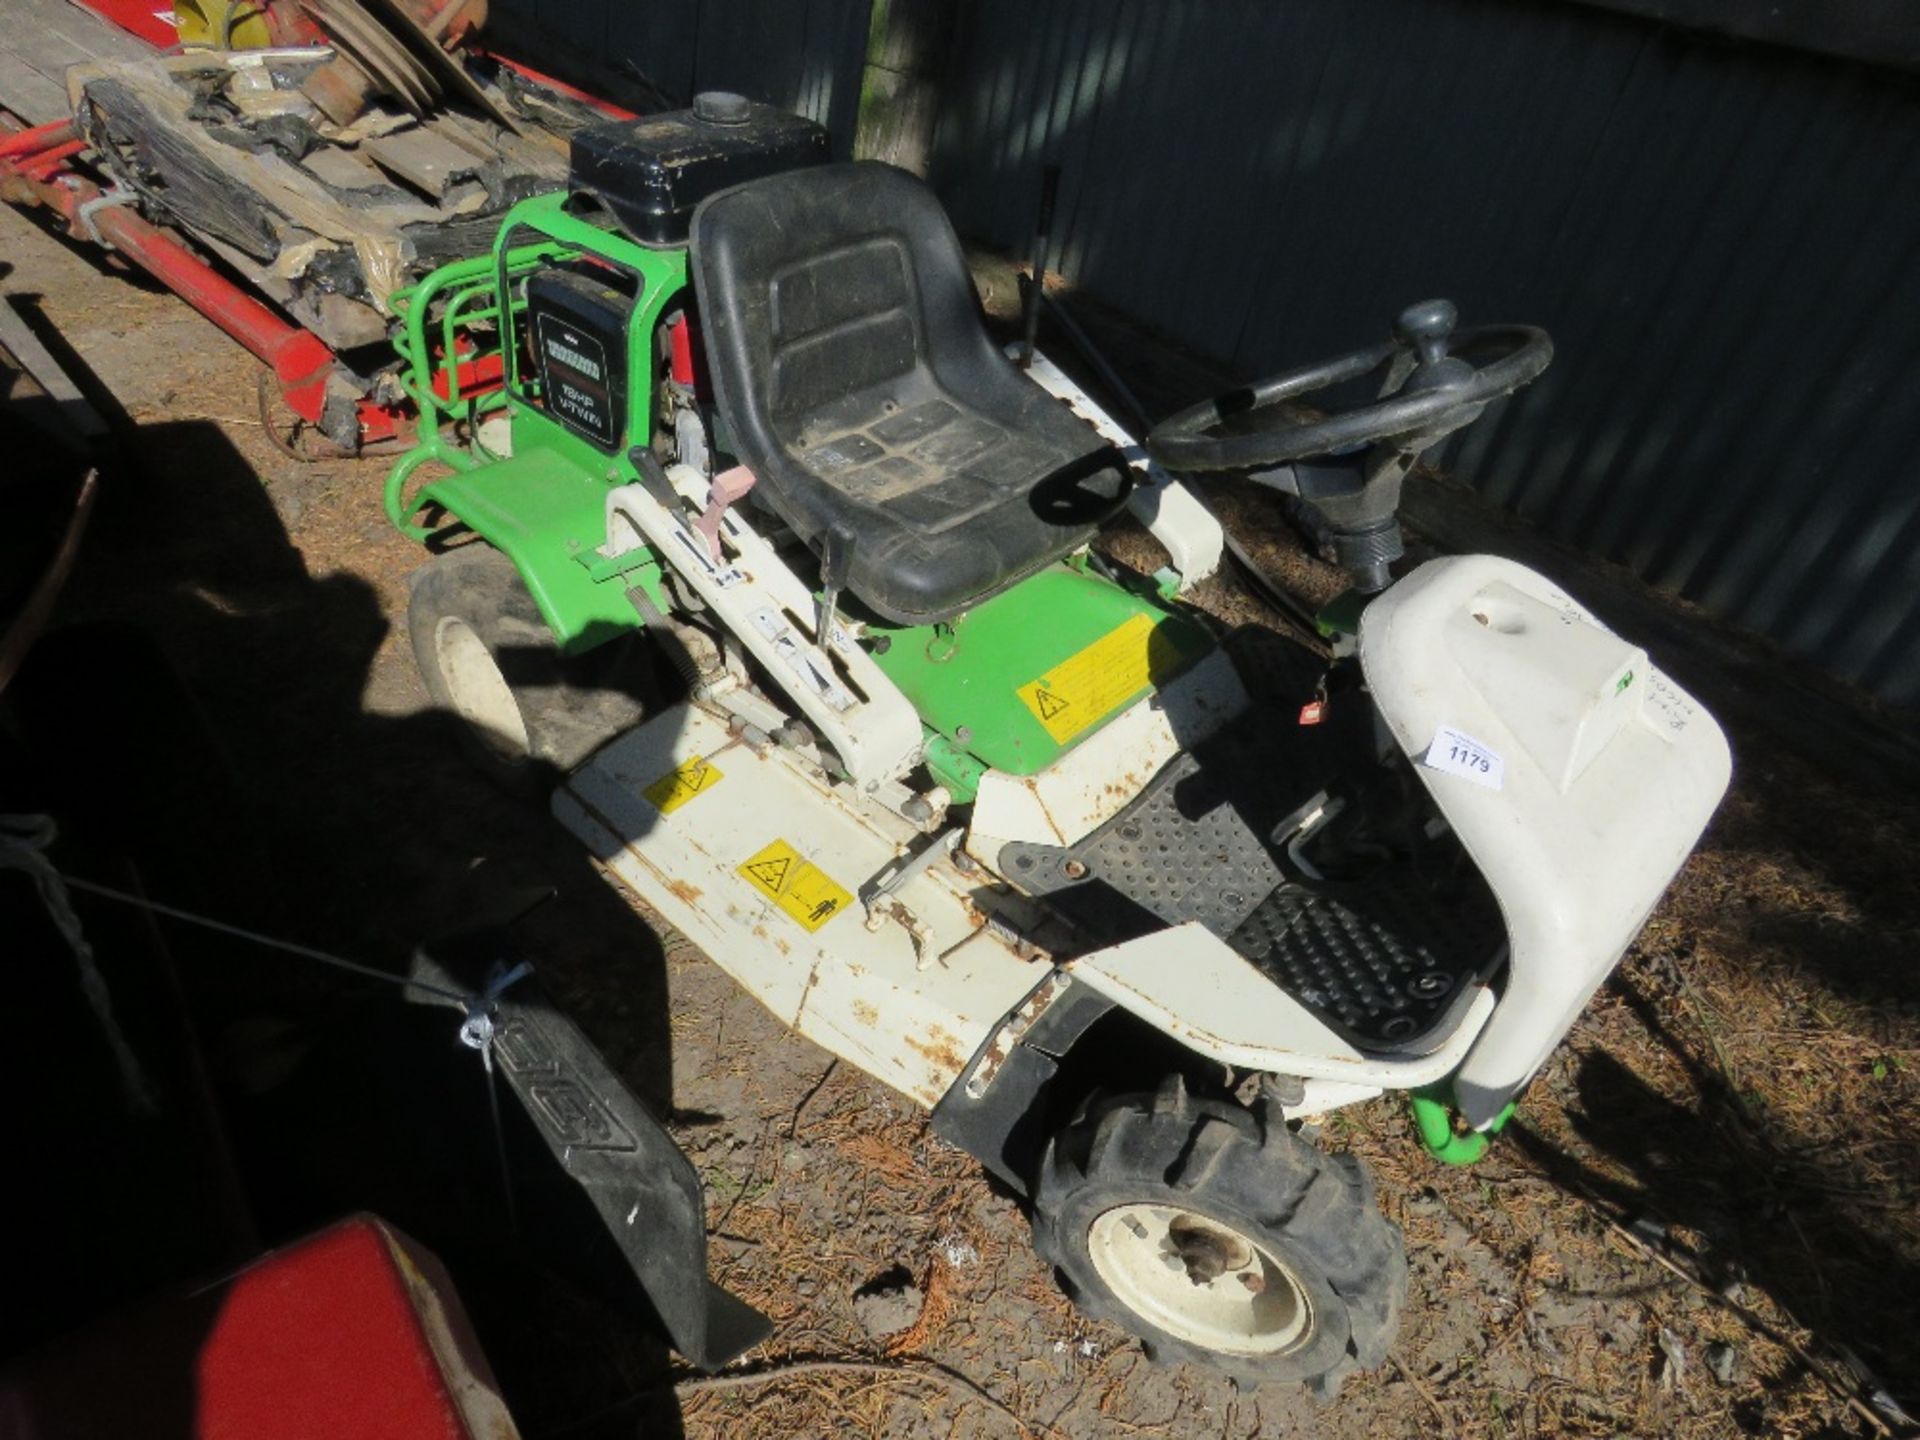 ETESIA BANK CUTTING MOWER. RUNS BUT NEED DRIVE BELT AND BATTERY. UNTESTED.